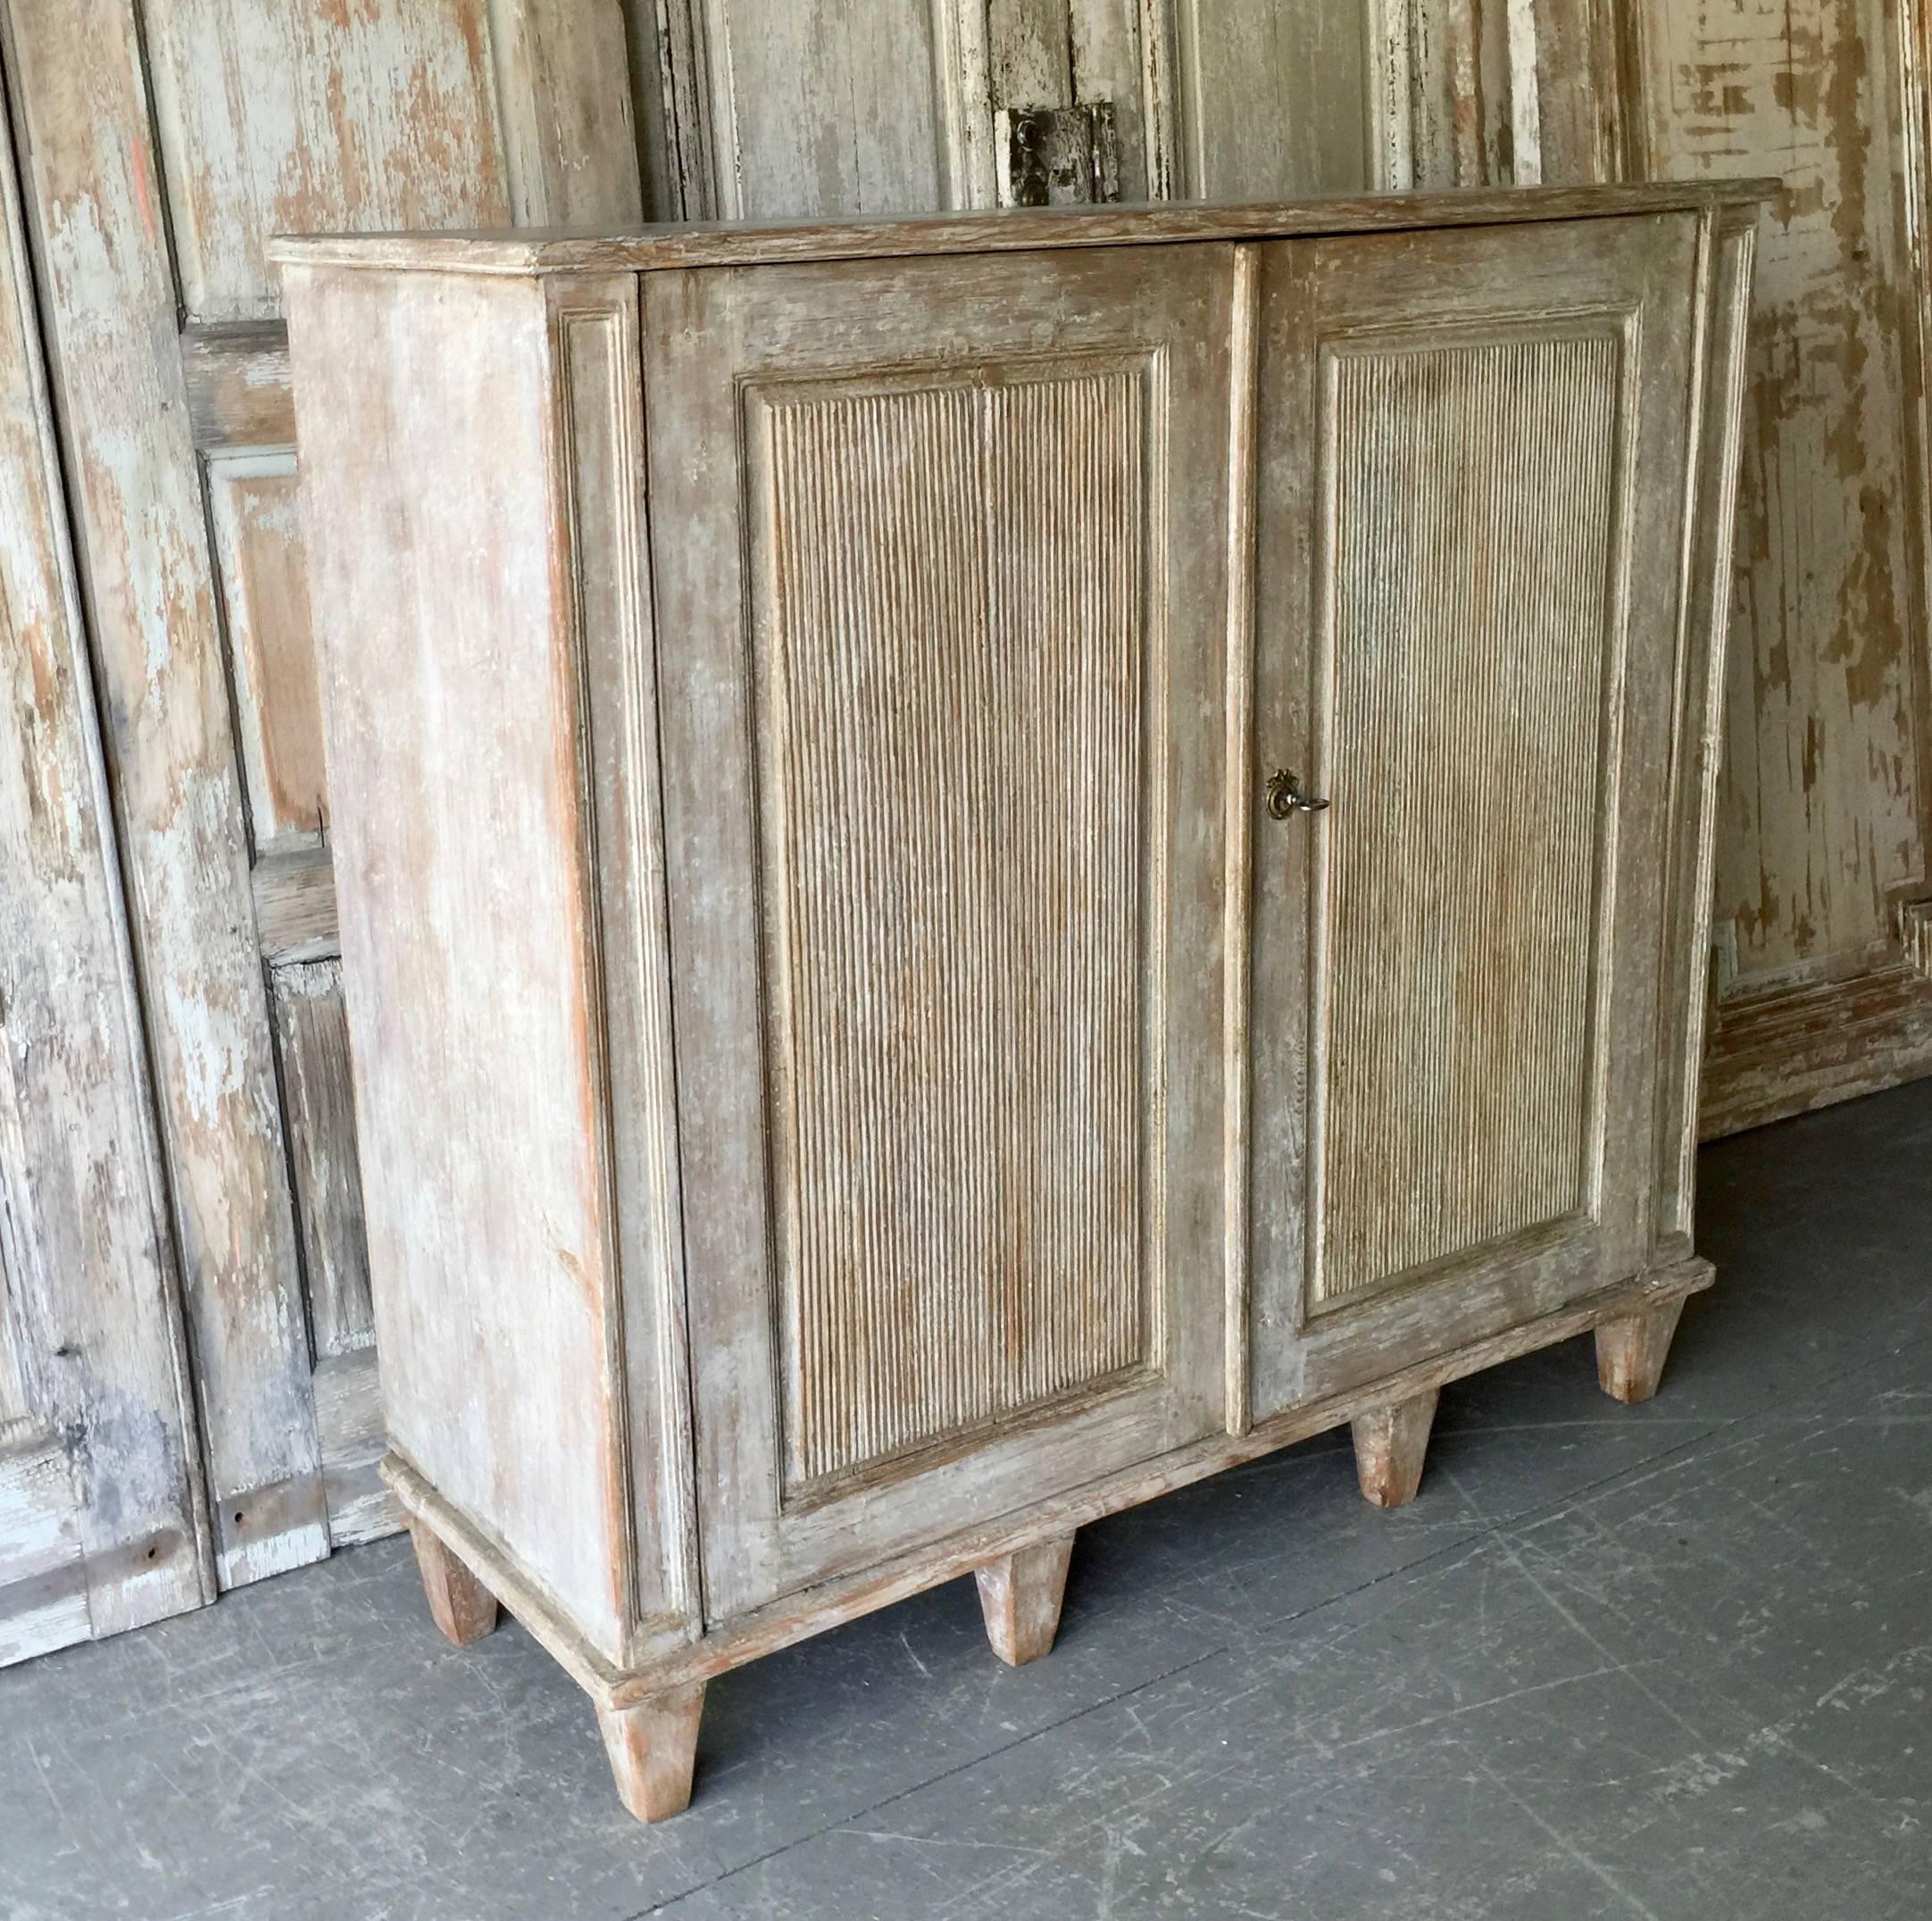 An elegant Gustavian period sideboard with beautifully carved, receded and panelled door fronts all in worn cream or white paint finish.
Värmland, Sweden, circa 1810-1820
More than ever, we selected the best, the rarest, the unusual, the